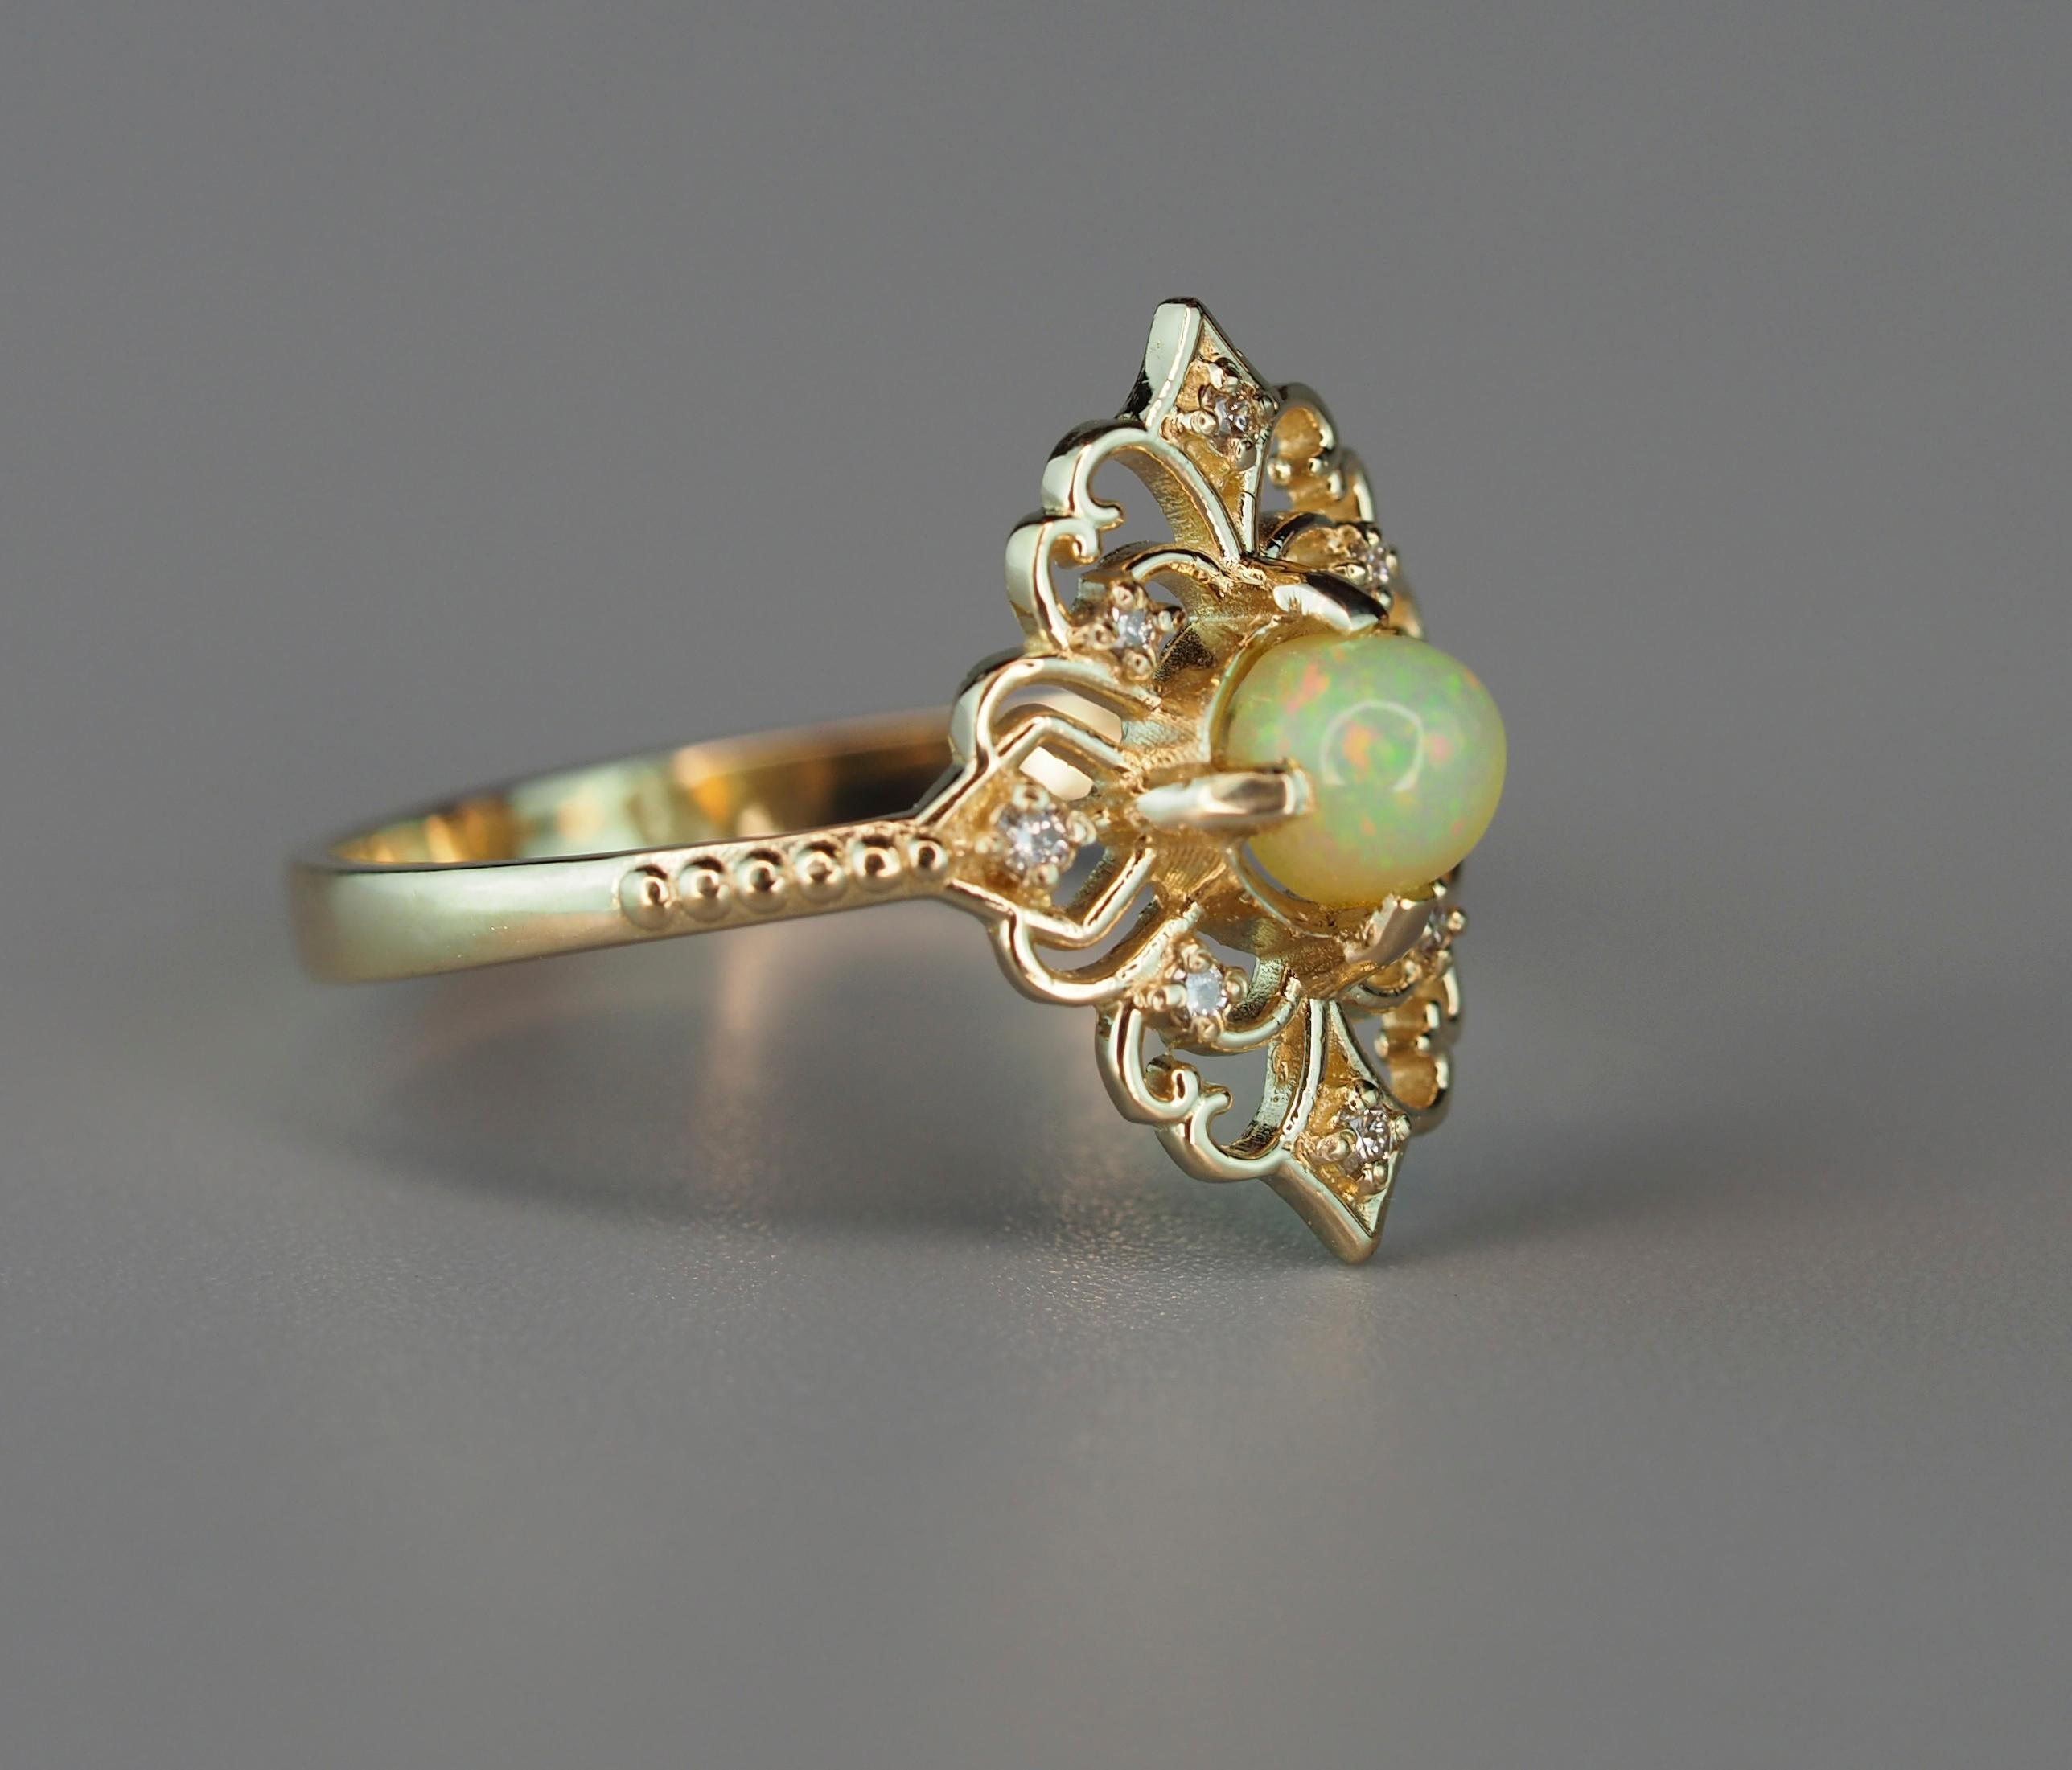 For Sale:  14k Gold Ring with Opal and Diamonds 3